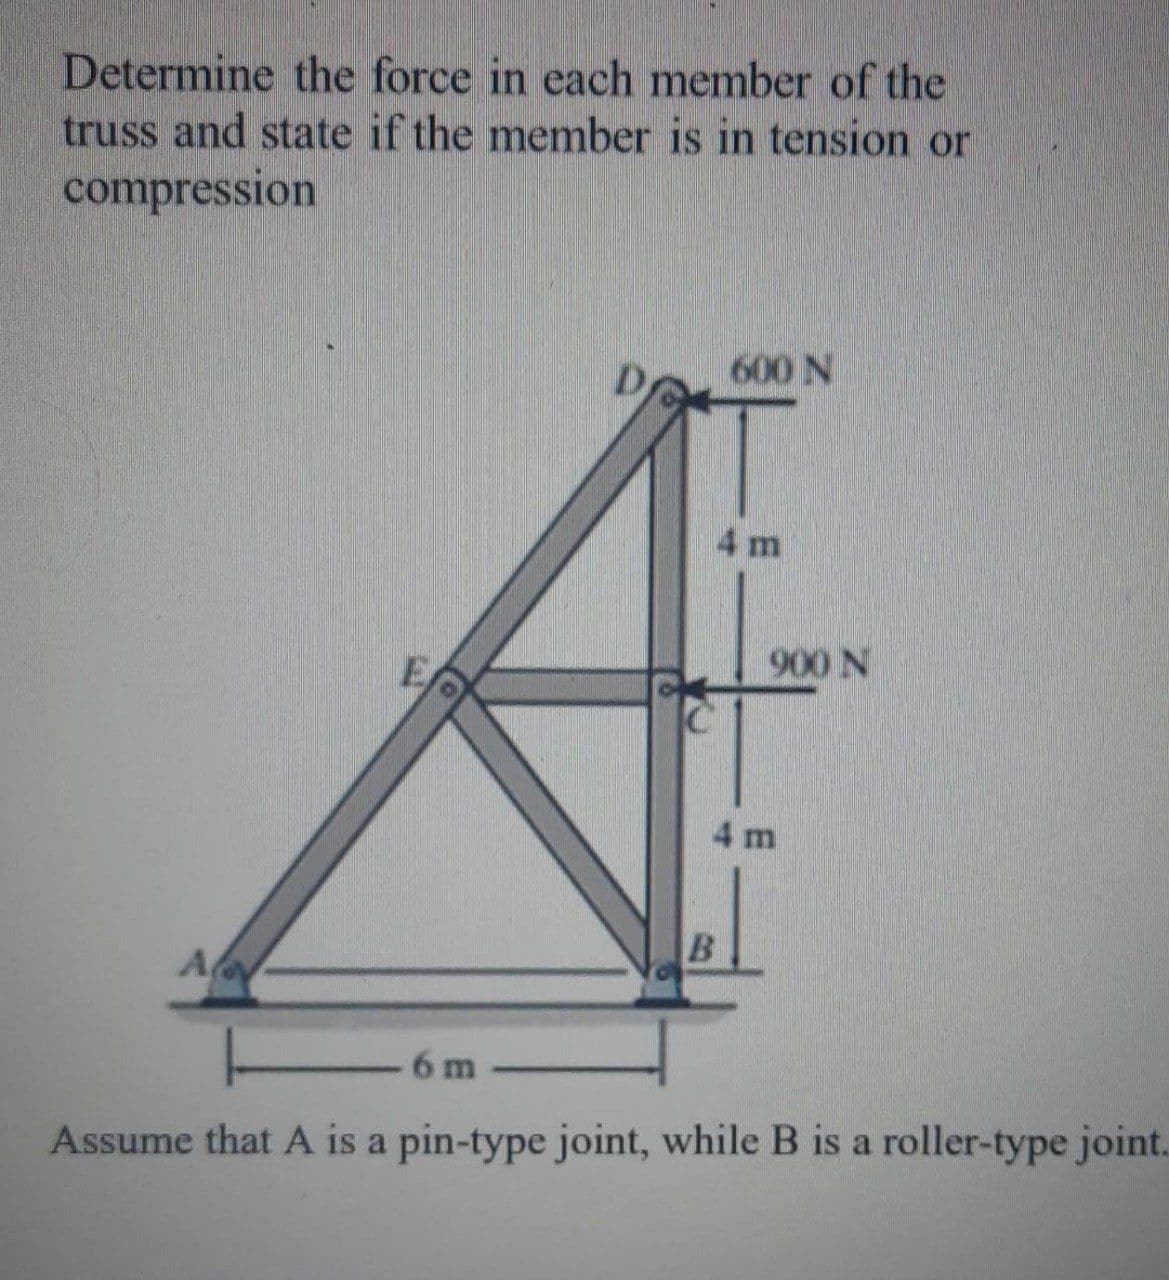 Determine the force in each member of the
truss and state if the member is in tension or
compression
600 N
4 m
900 N
4 m
A
Assume that A is a pin-type joint, while B is a roller-type joint.
